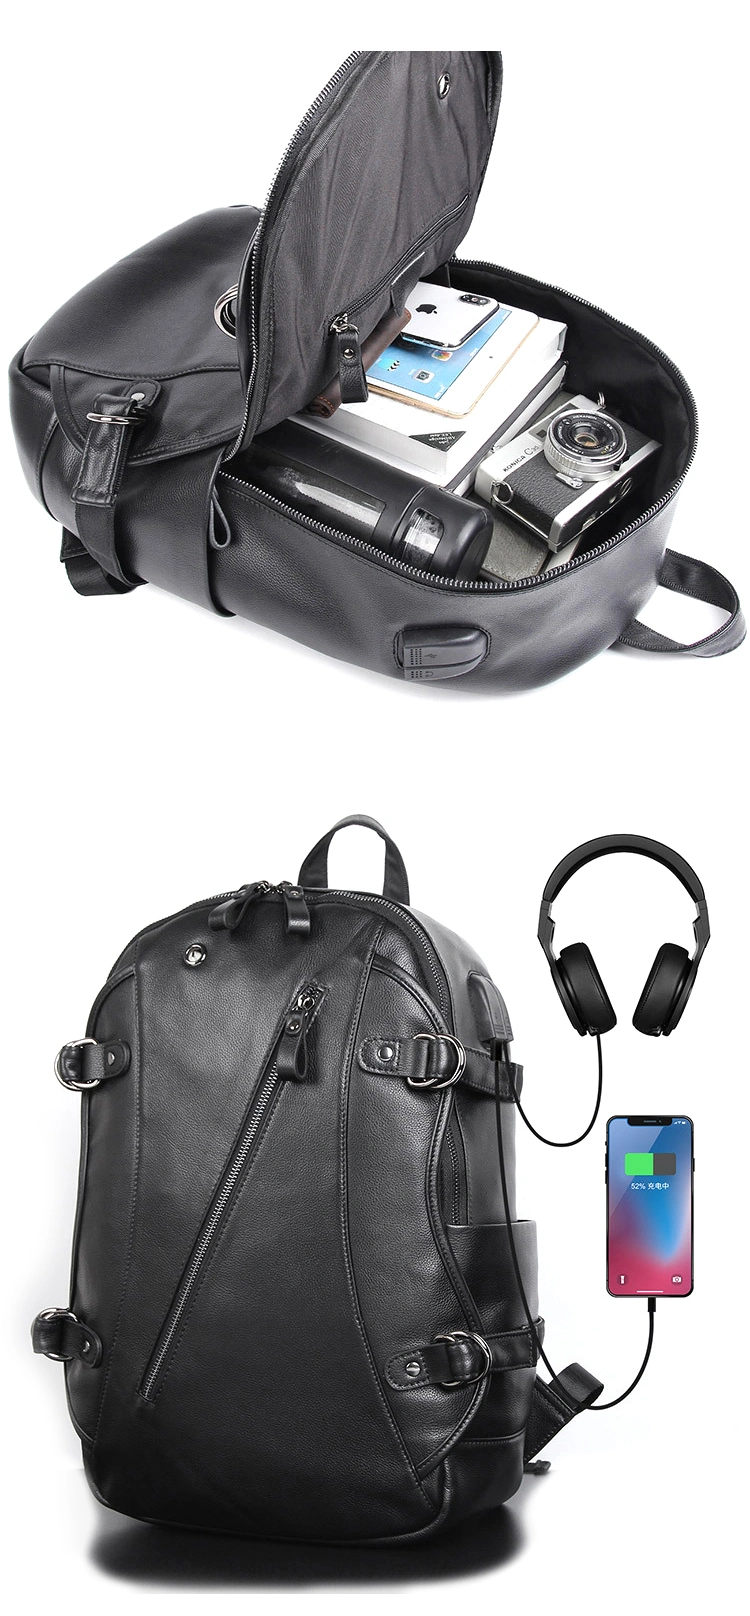 Newest Design Low Price Good Quality Black Real Leather Laptop Backpack with USB Charging Port